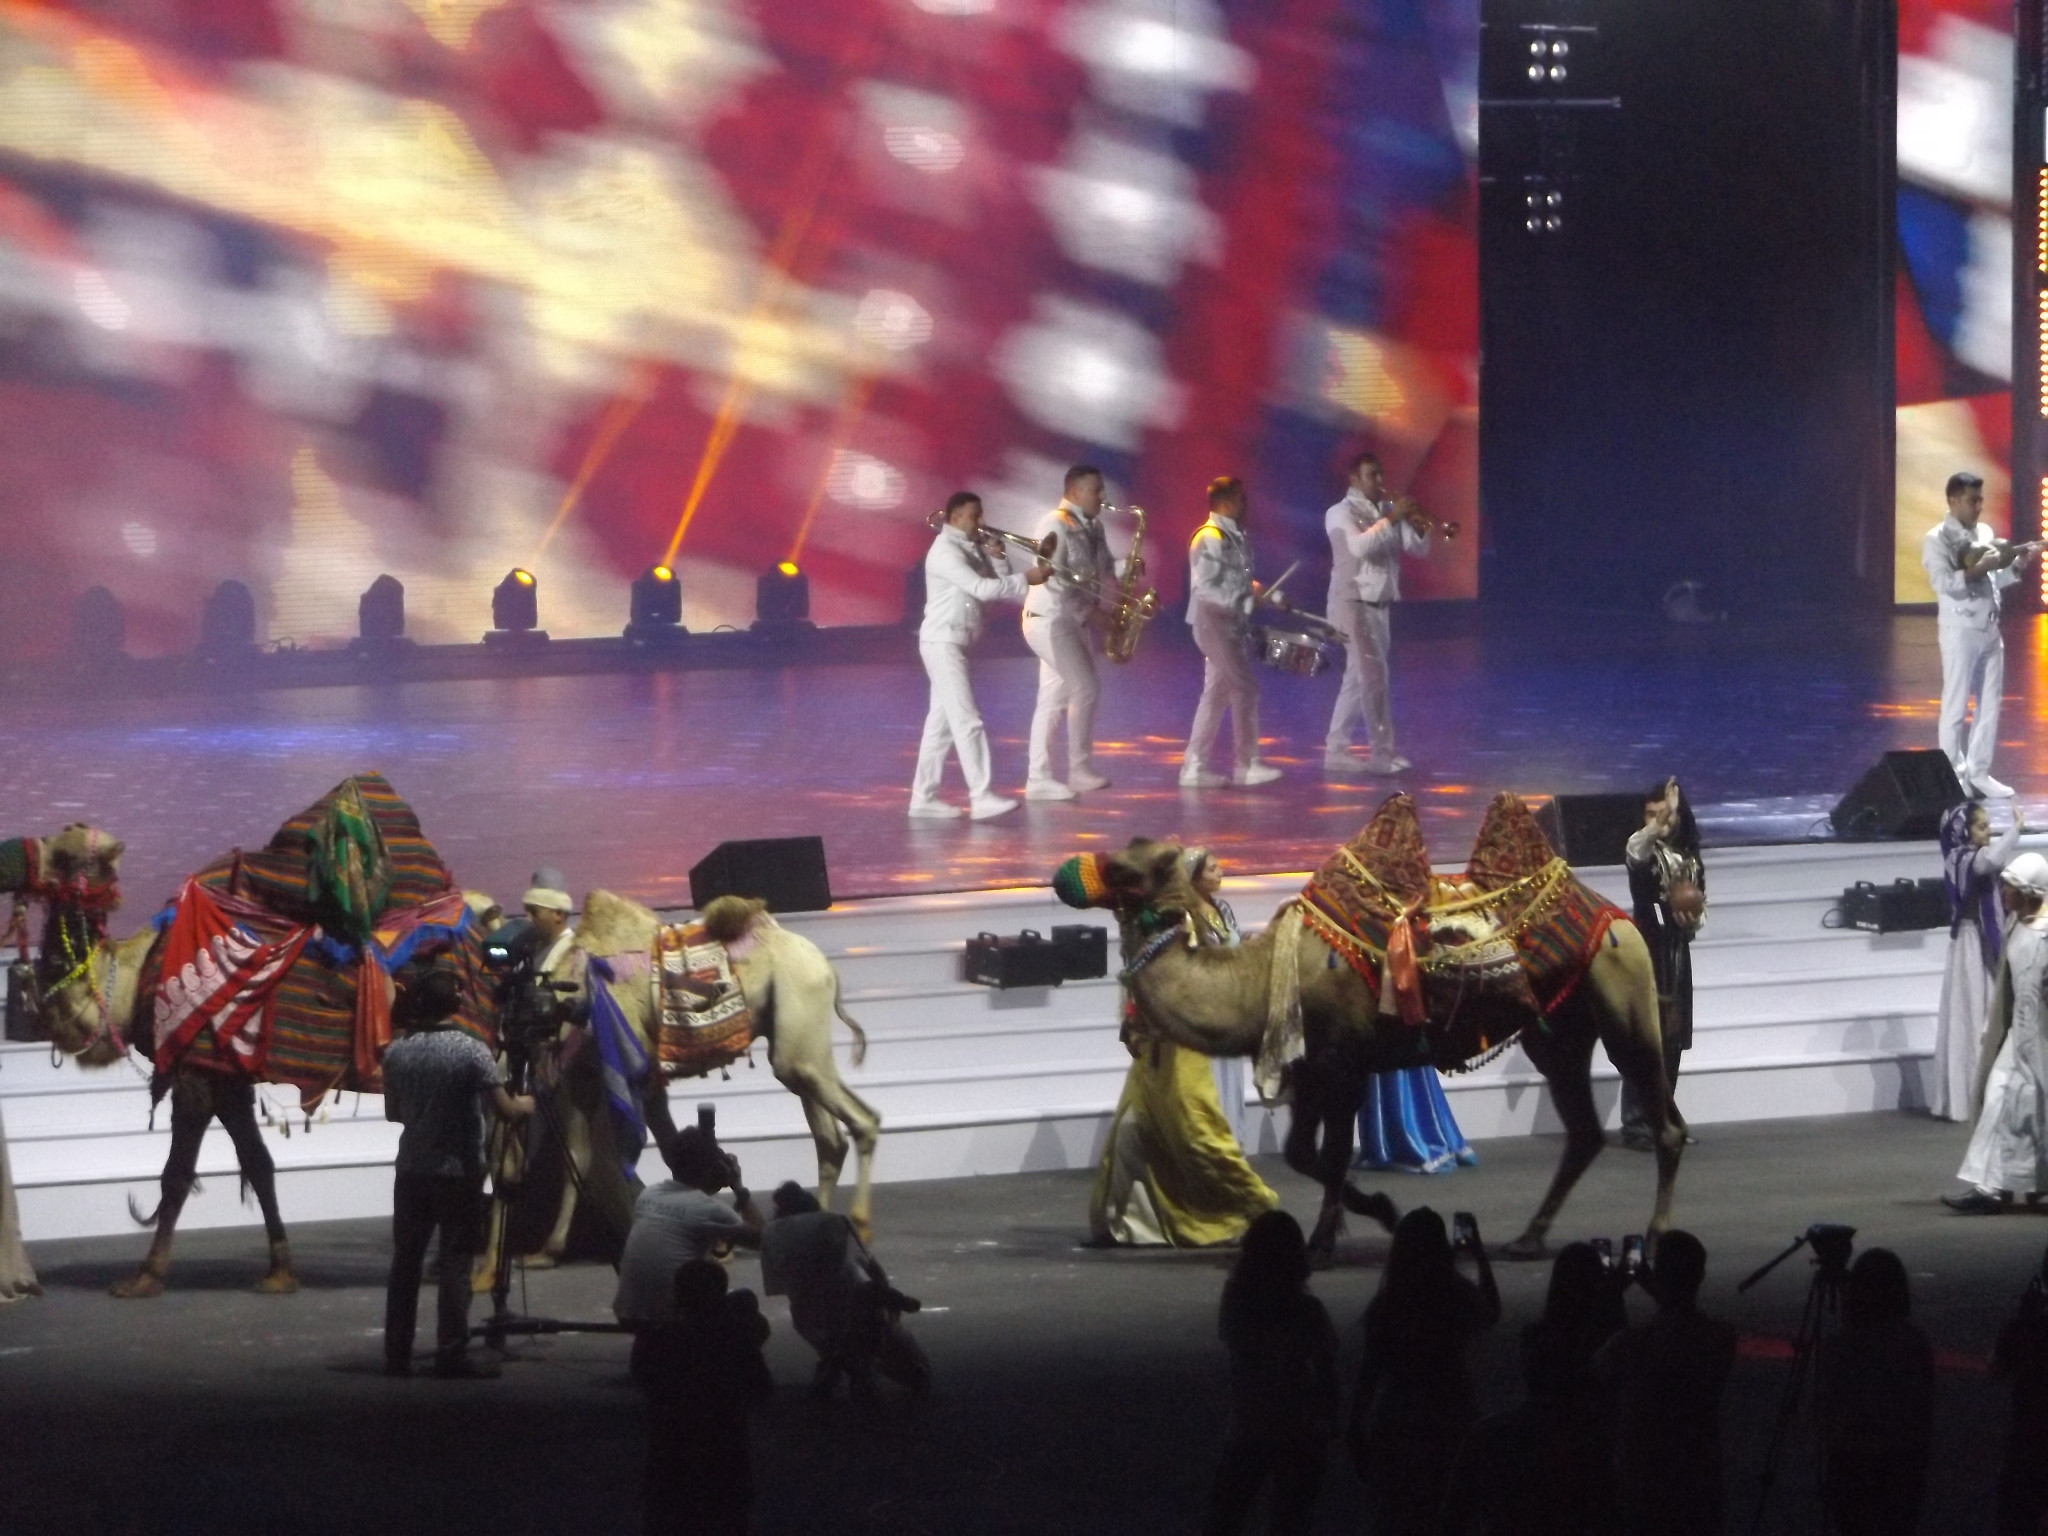 Camels paraded as part of the Opening Ceremony for the ISSF World Shooting Championships in Baku ©ITG